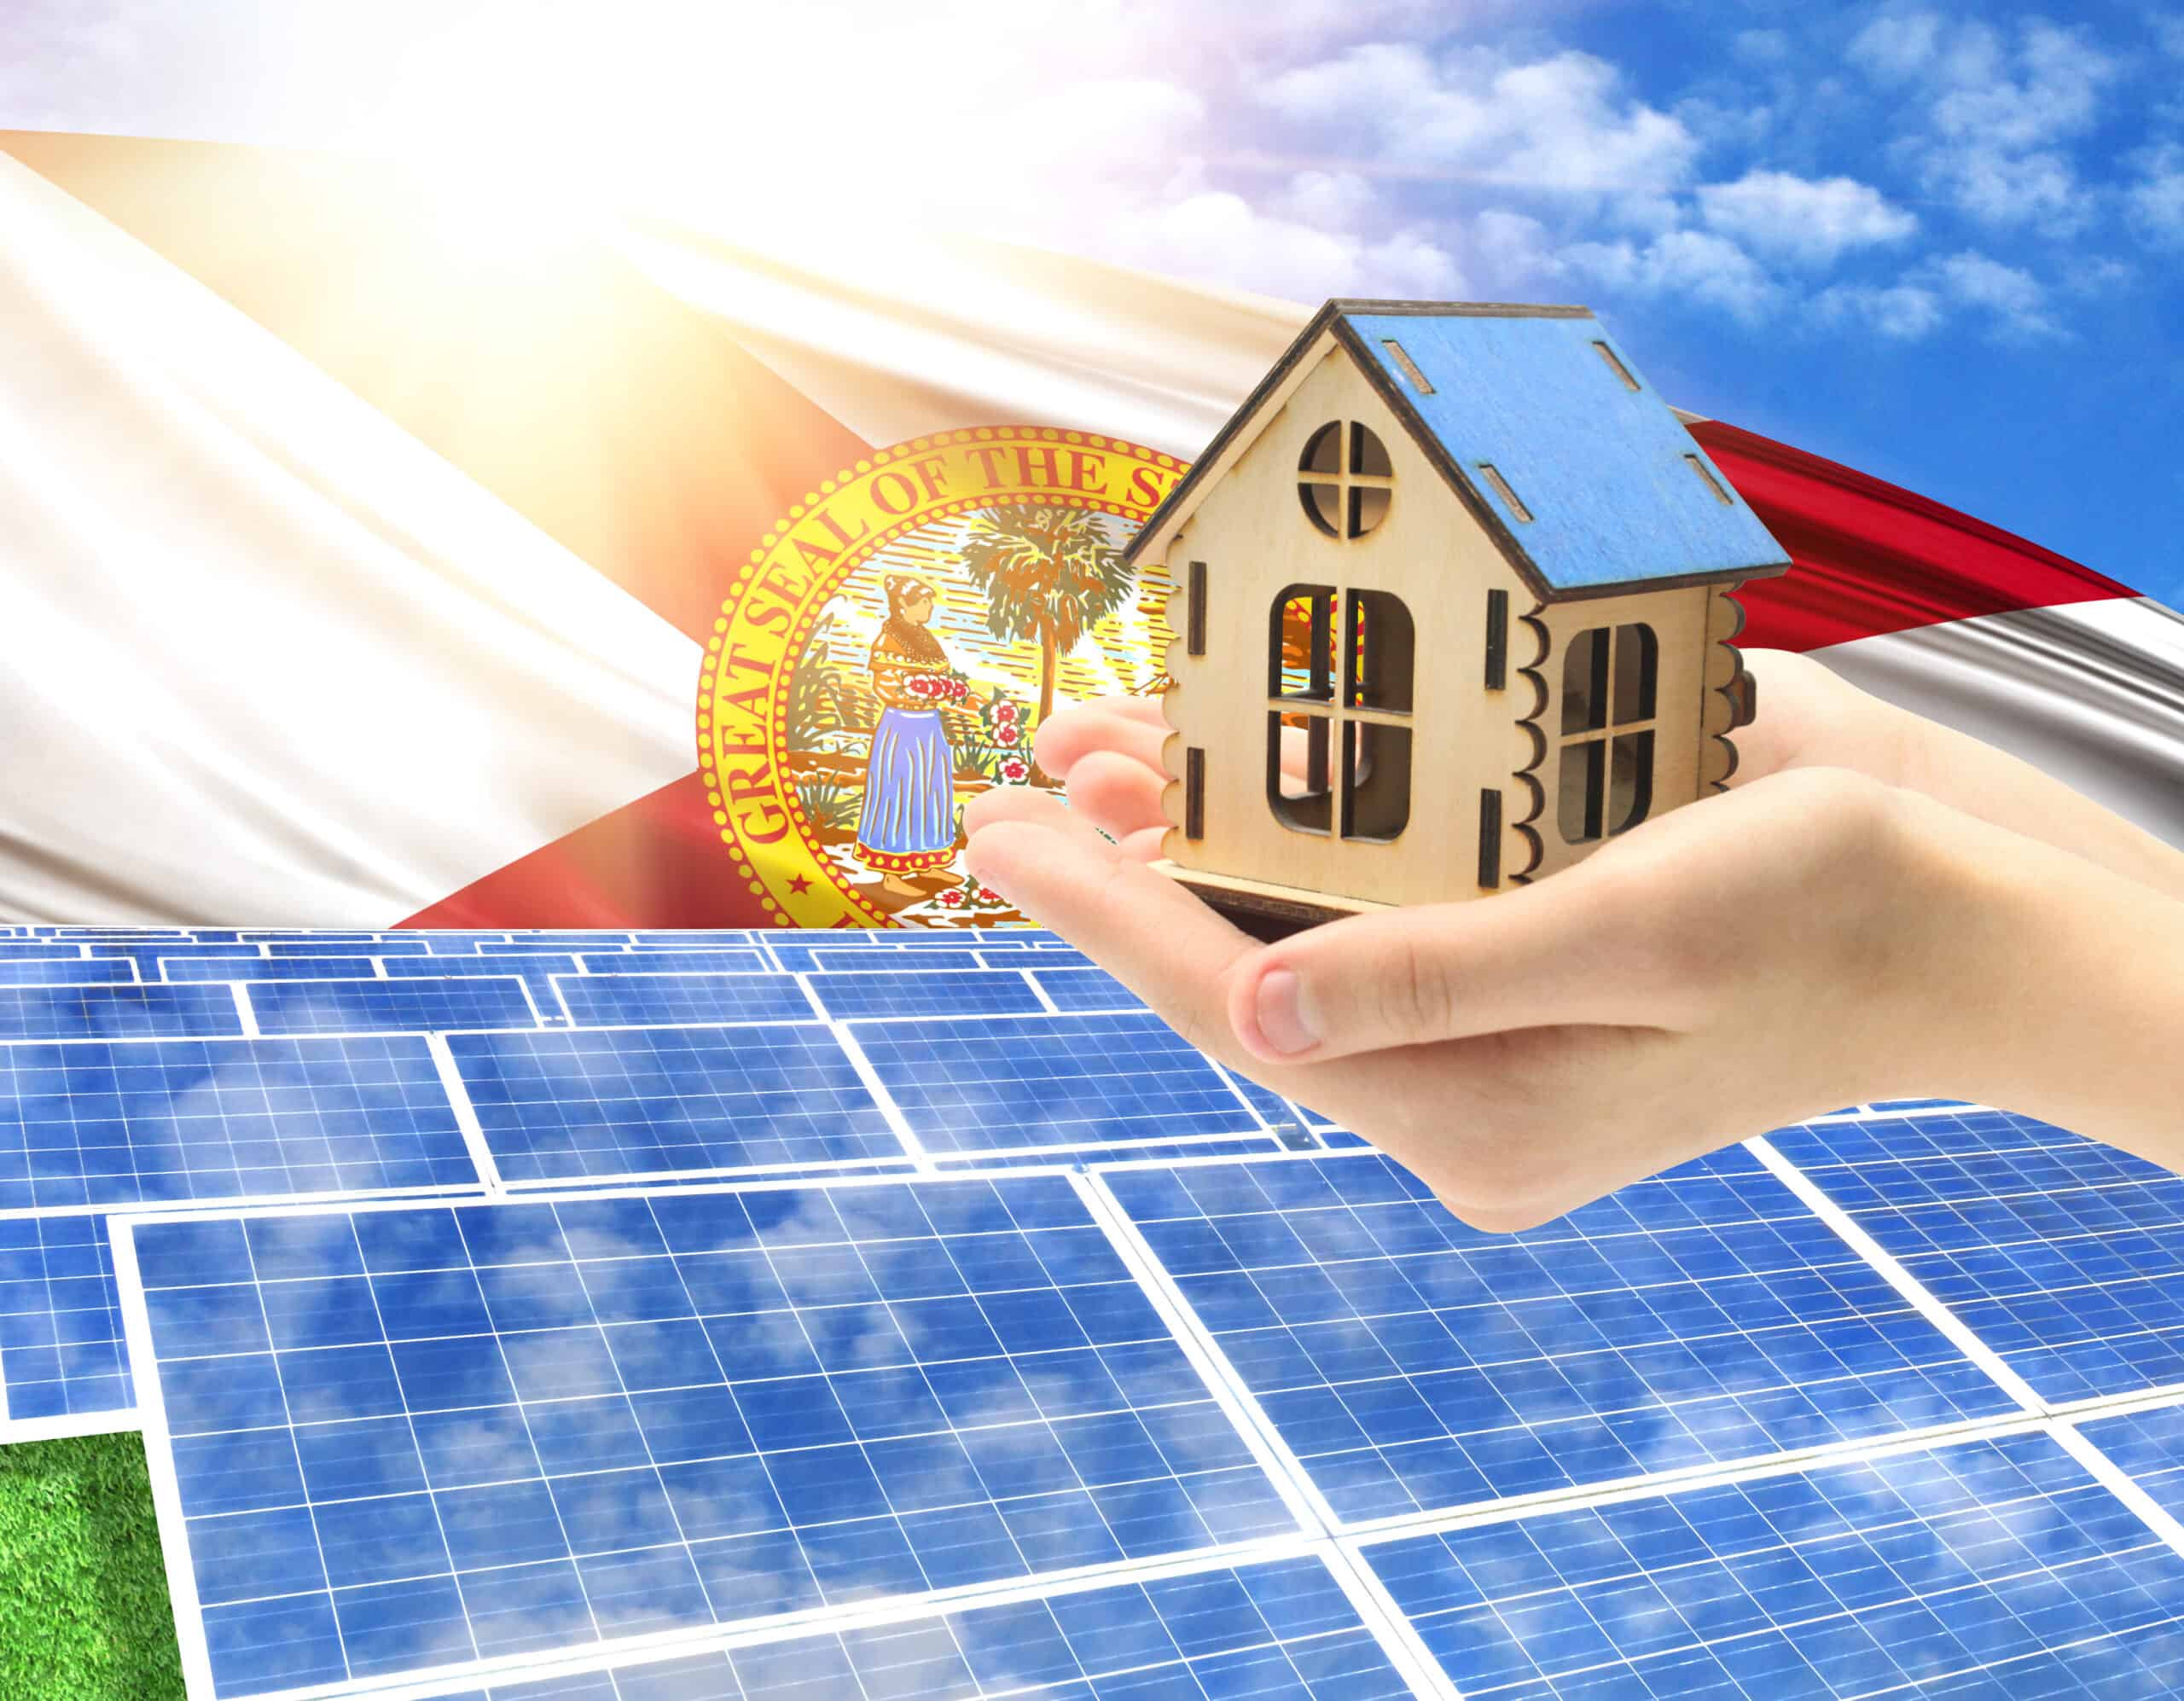 photo with solar panels and a hand holding a toy house with Florida state flag with sun rays